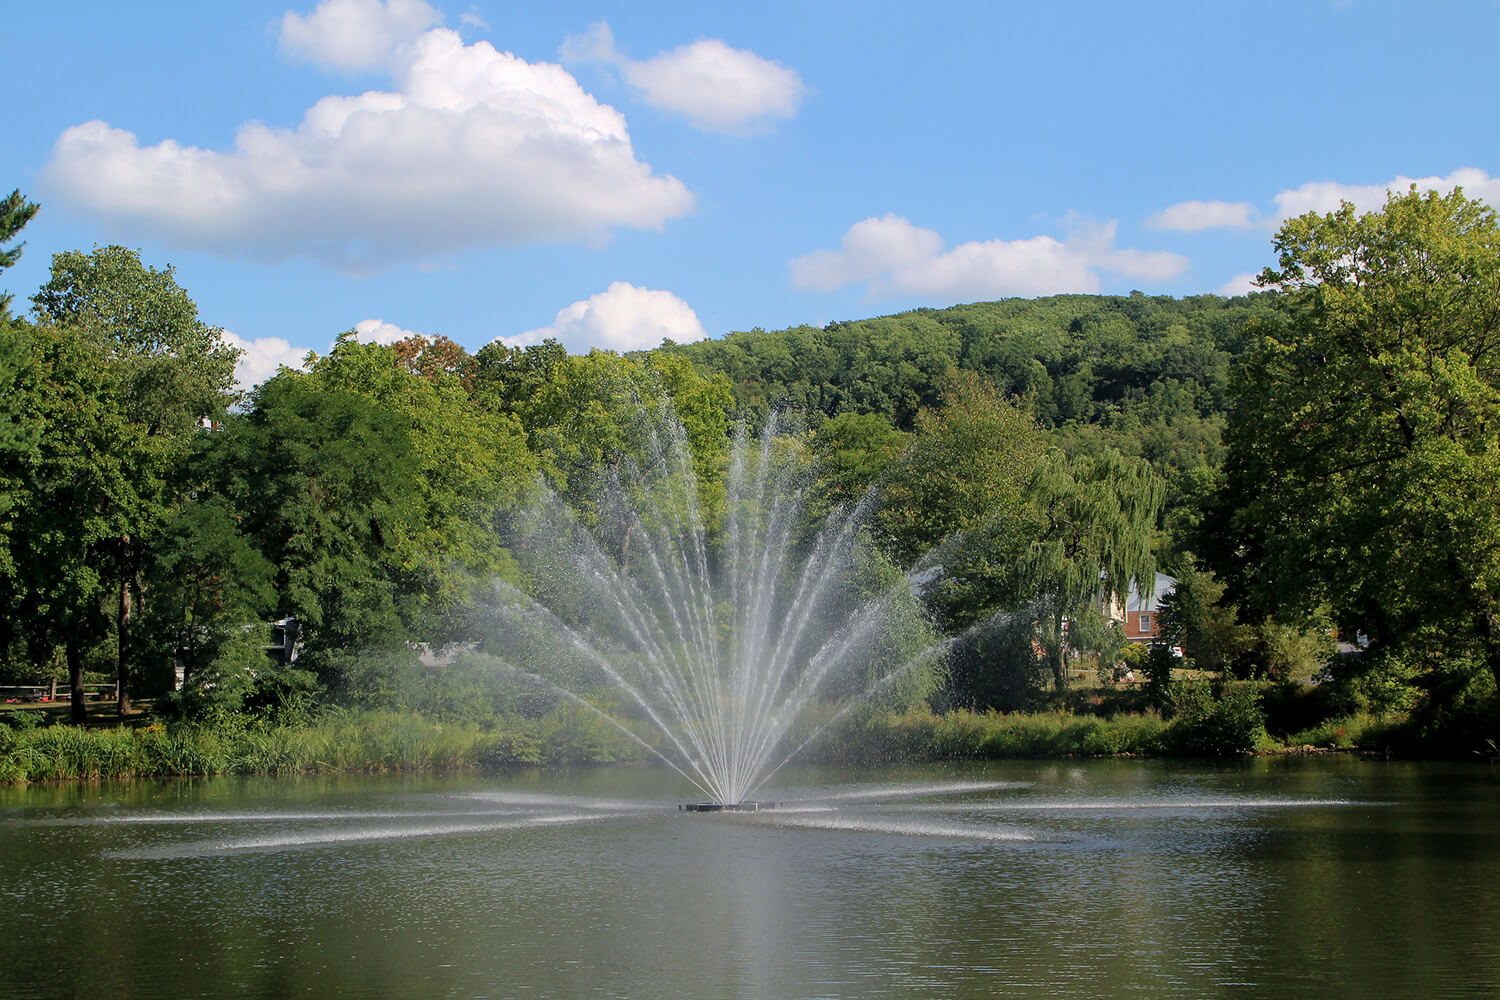 One of Otterbine's Equinox Aerating Fountains in a residential area